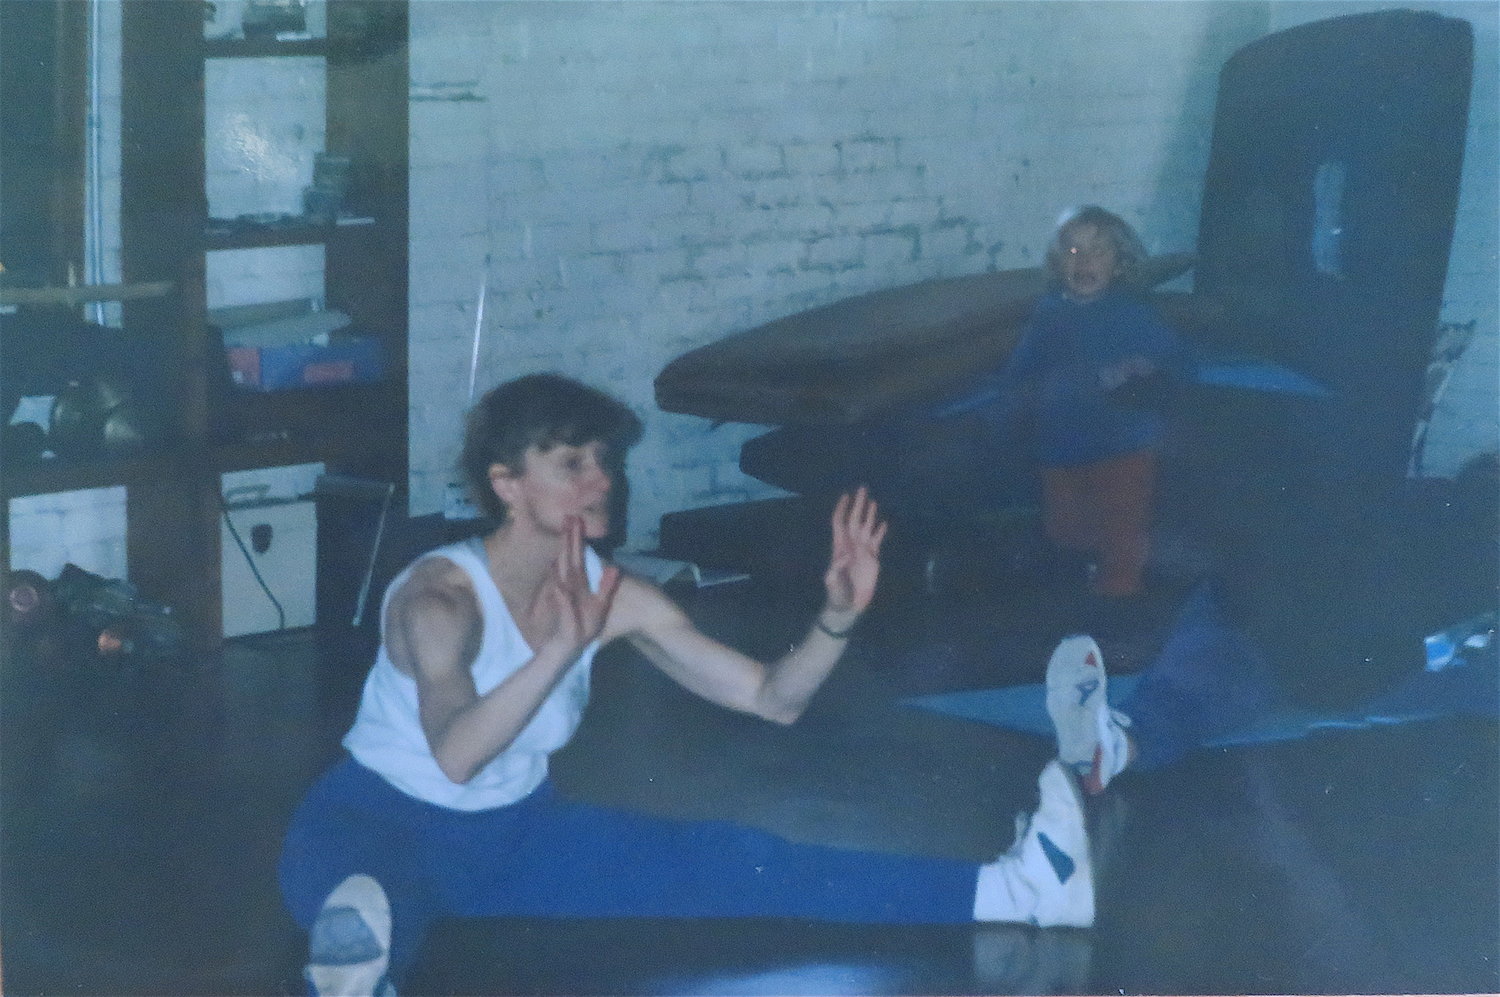 In the 1980s, Nelson's Feminist Self-Defense and Karate Association broadened into Movement Arts, a school for martial arts and dance in Lansing's oldest firehouse on Prospect and Bingham streets in Lansing.